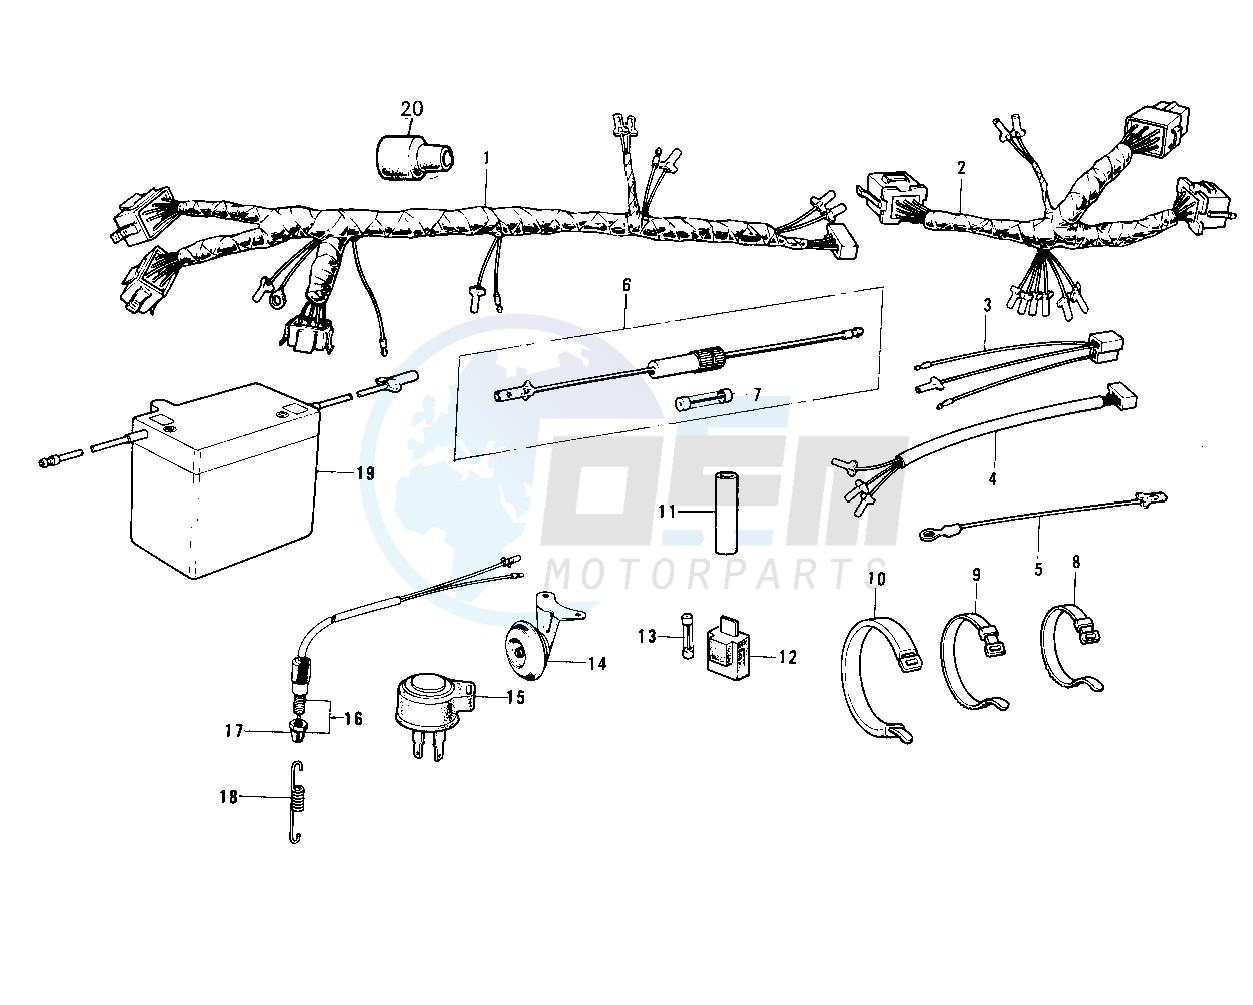 CHASSIS ELECTRICAL EQUIPMENT -- 74-75- - blueprint